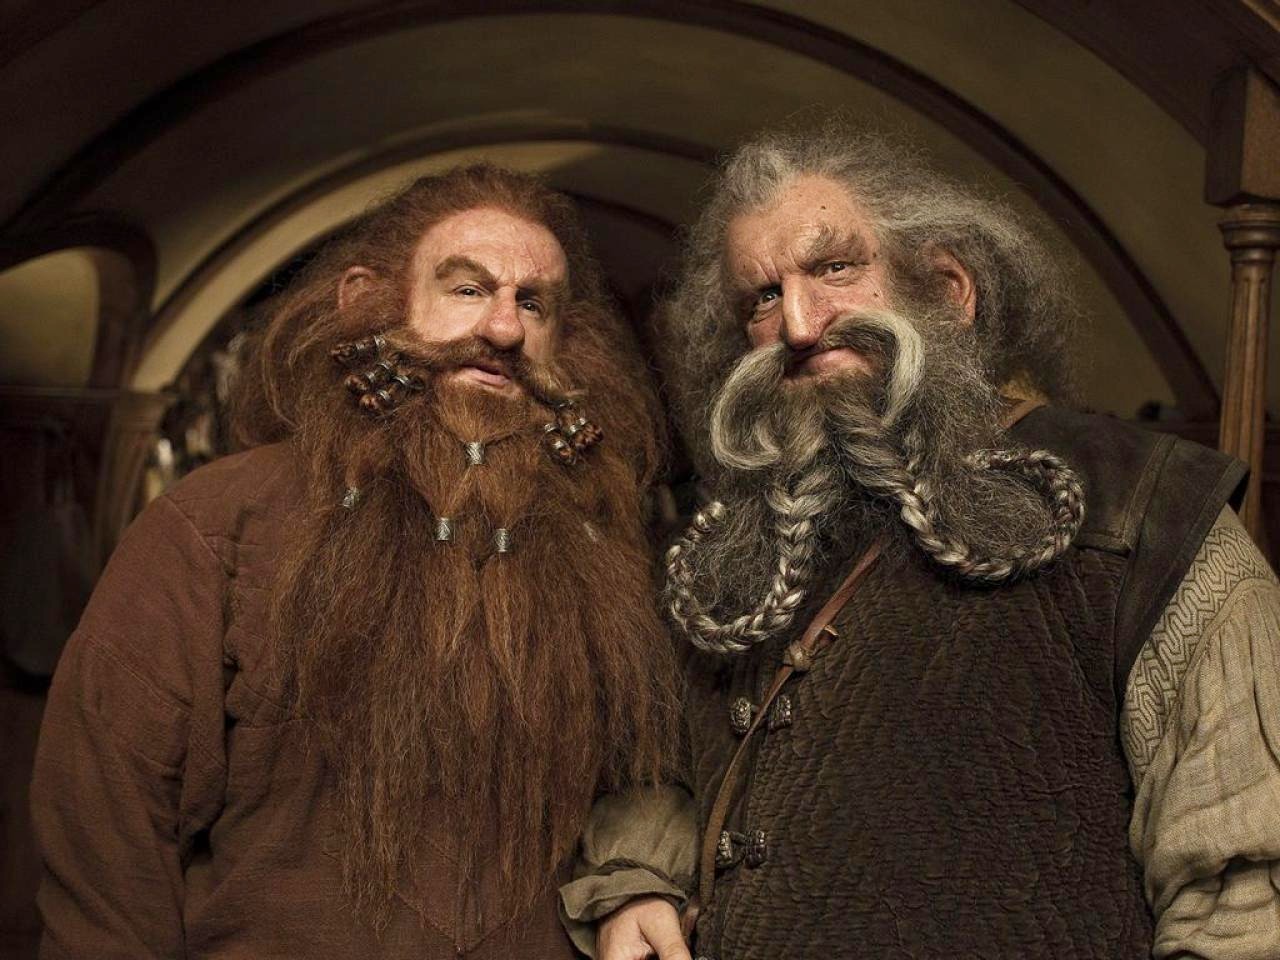 Peter Hambleton stars as Gloin and John Callen stars as Oin  in Warner Bros. Pictures' The Hobbit: An Unexpected Journey (2012)